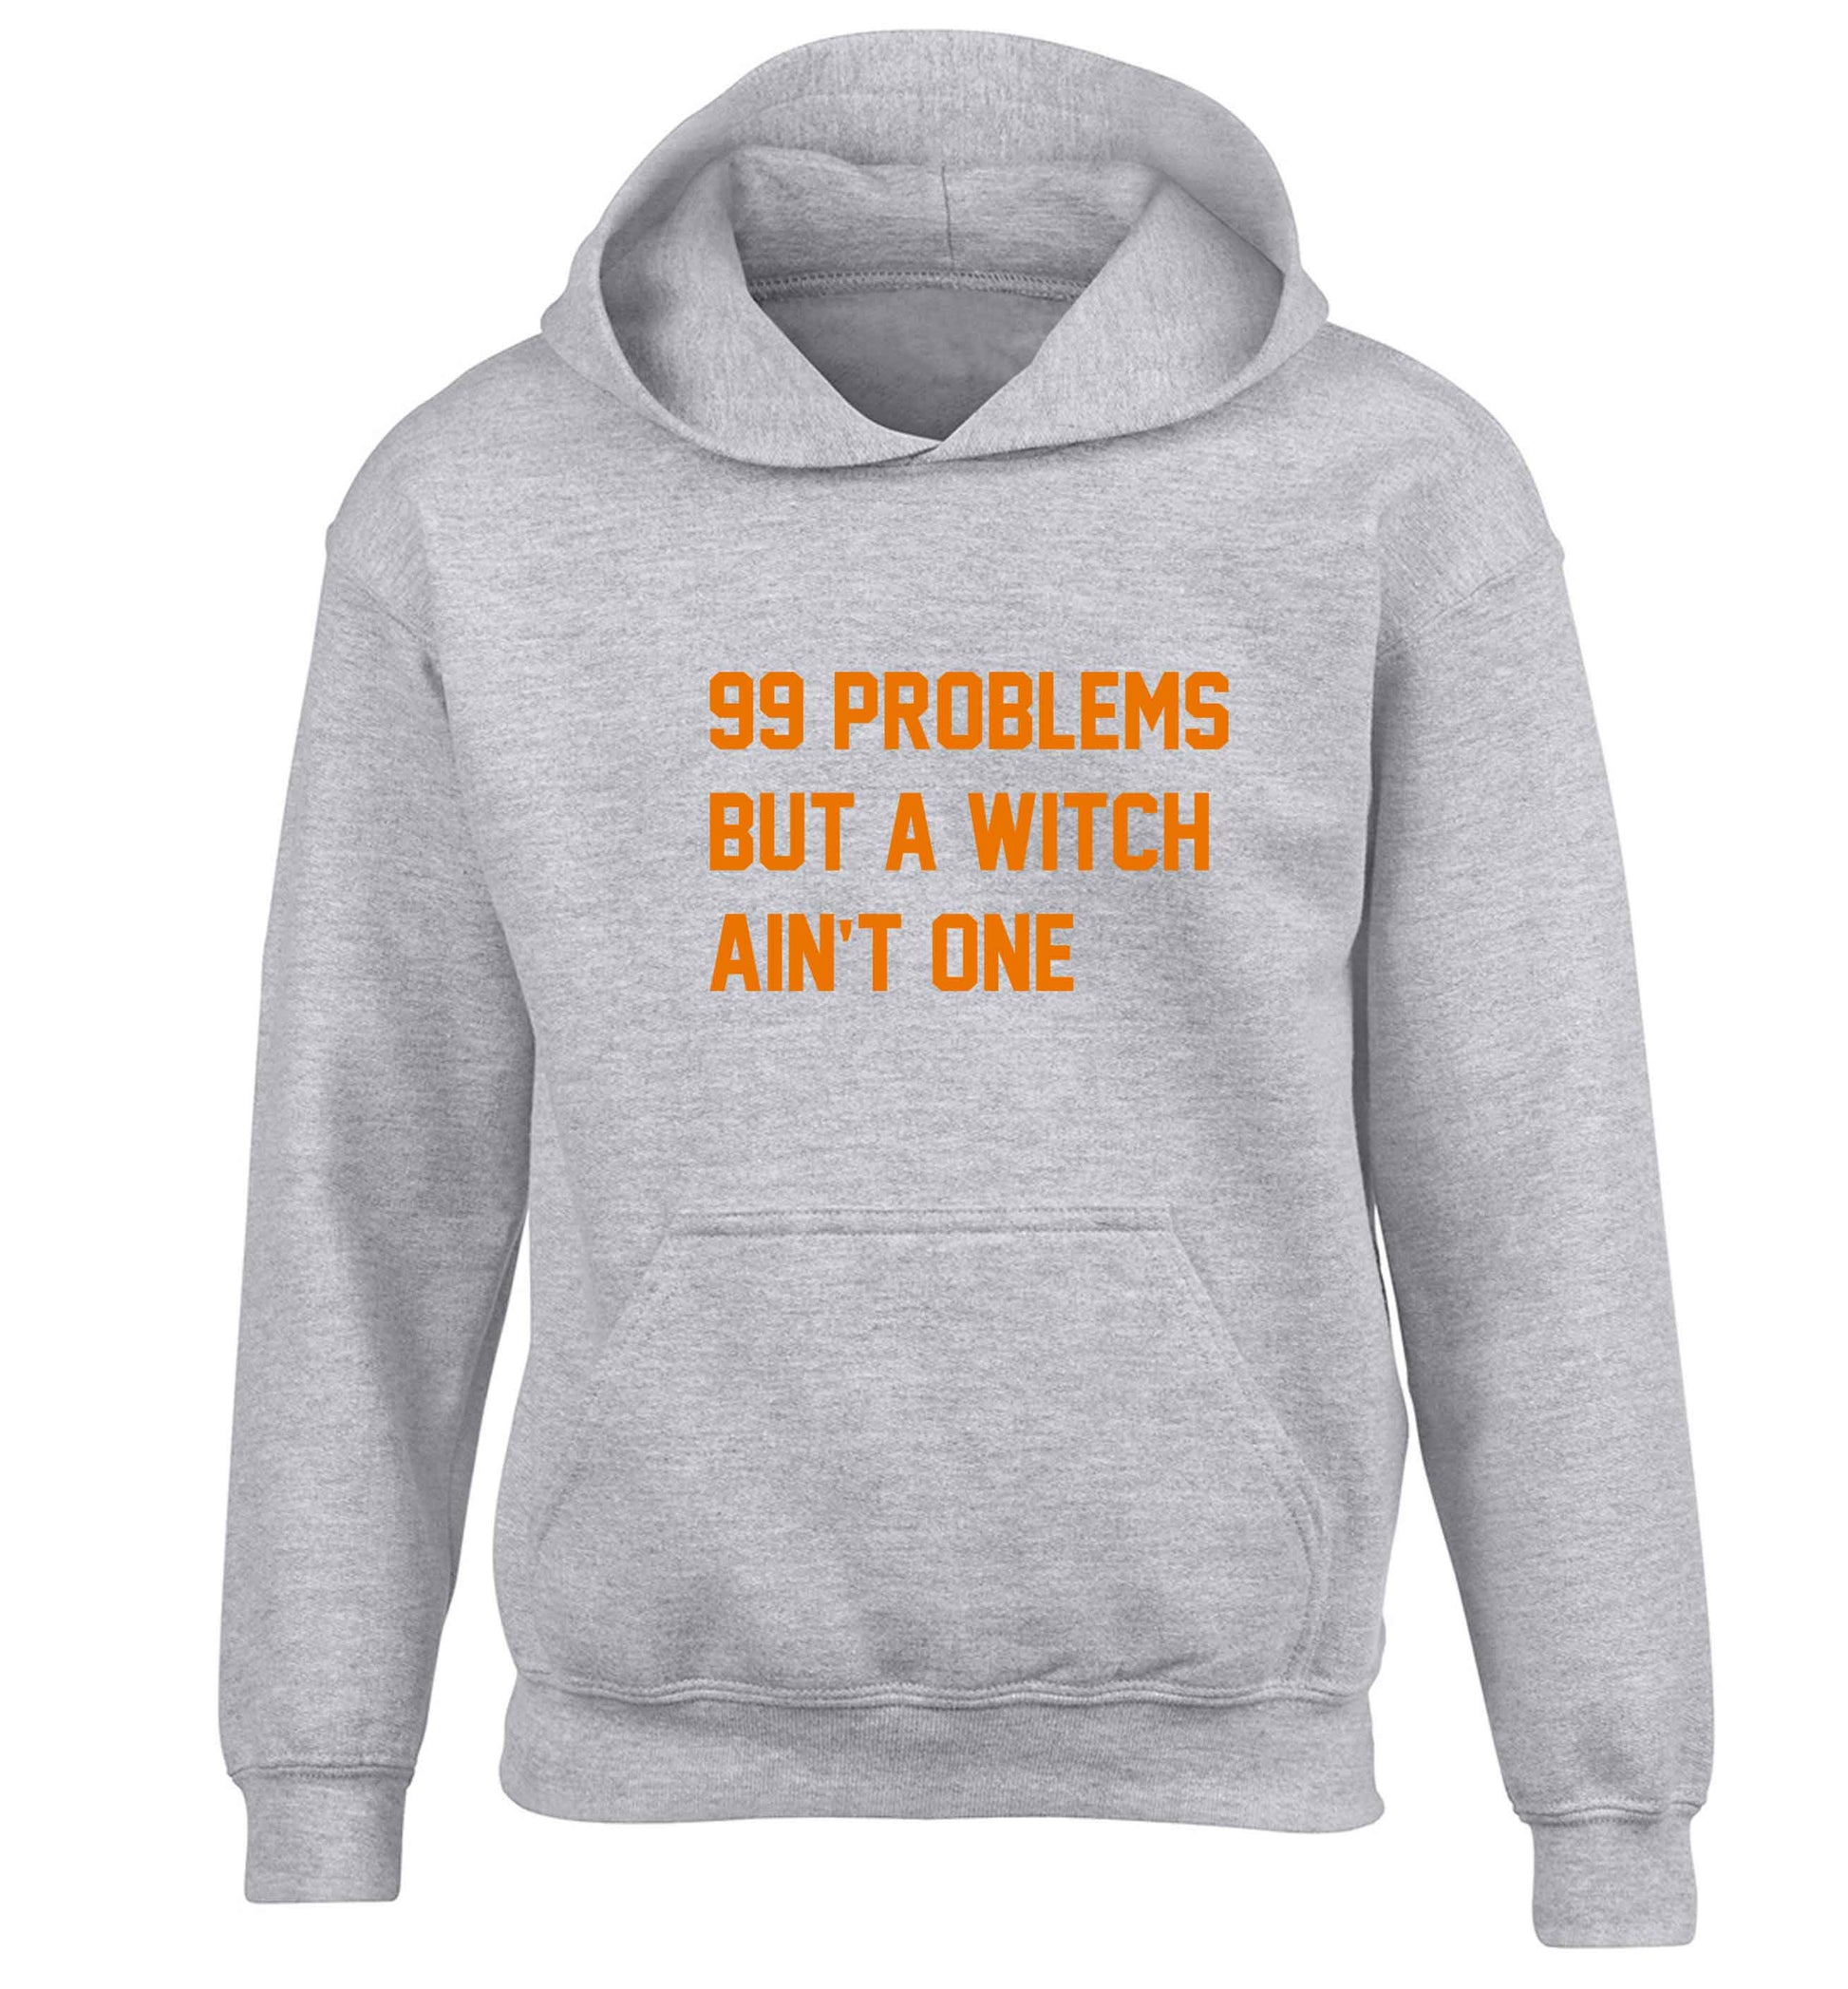 99 Problems but a witch aint one children's grey hoodie 12-13 Years